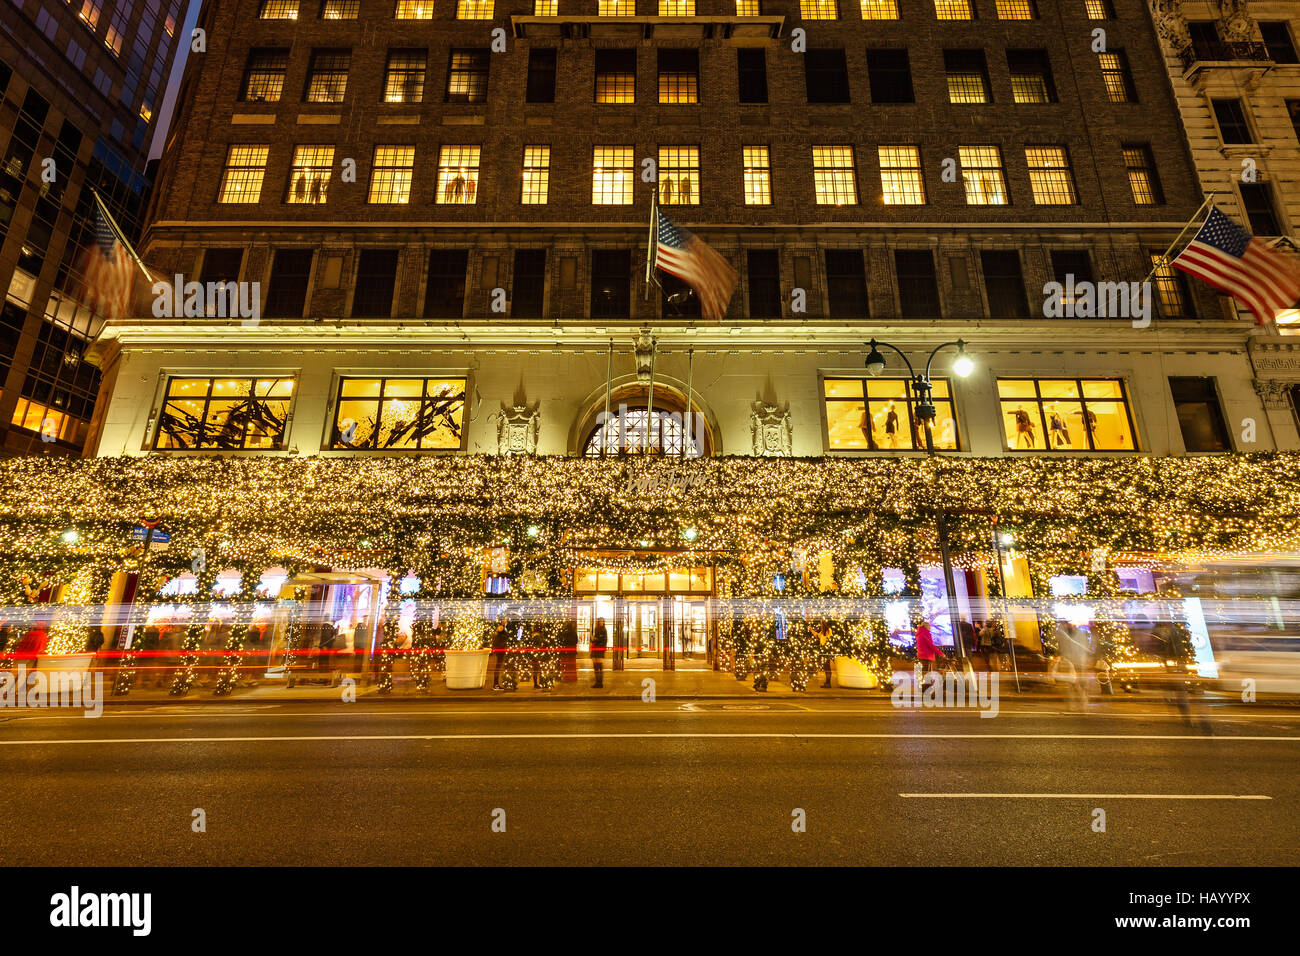 Lord & Taylor (Department Store) with Christmas lights and holiday decorations. 5th Avenue, Midtown Manhattan, New York CIty Stock Photo